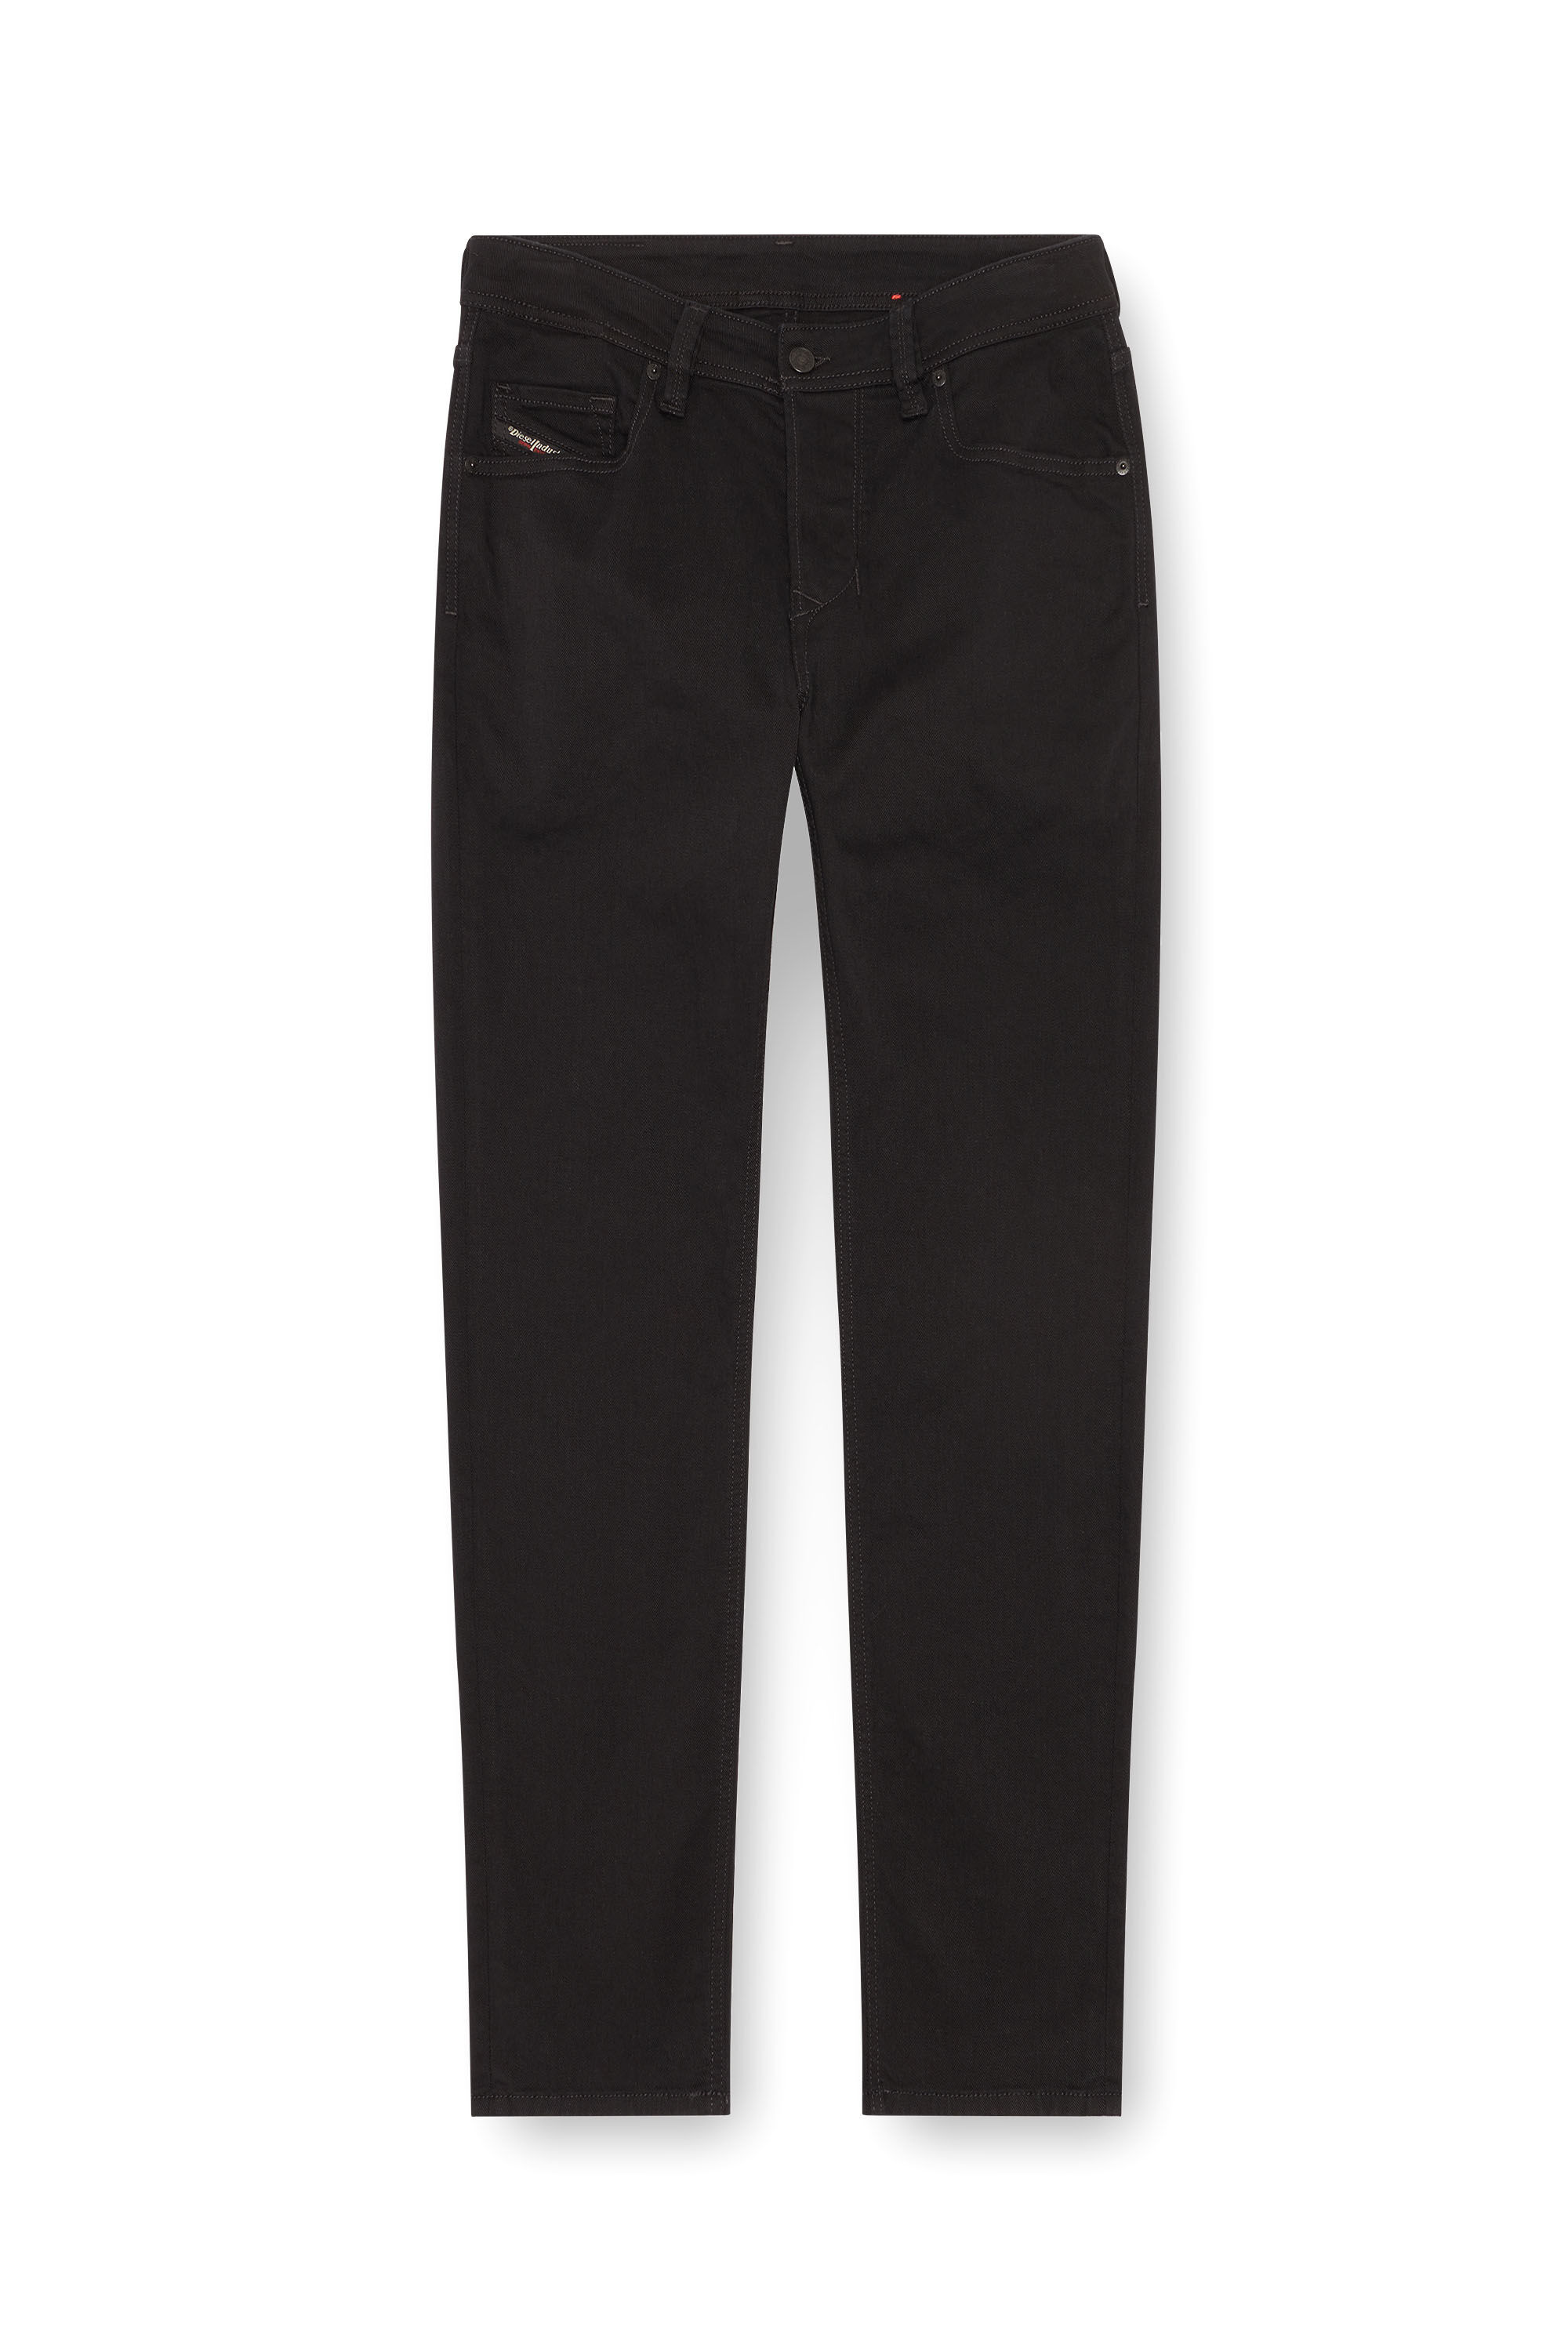 Diesel - Tapered Jeans 1986 Larkee-Beex 0688H, Hombre Tapered Jeans - 1986 Larkee-Beex in Negro - Image 2